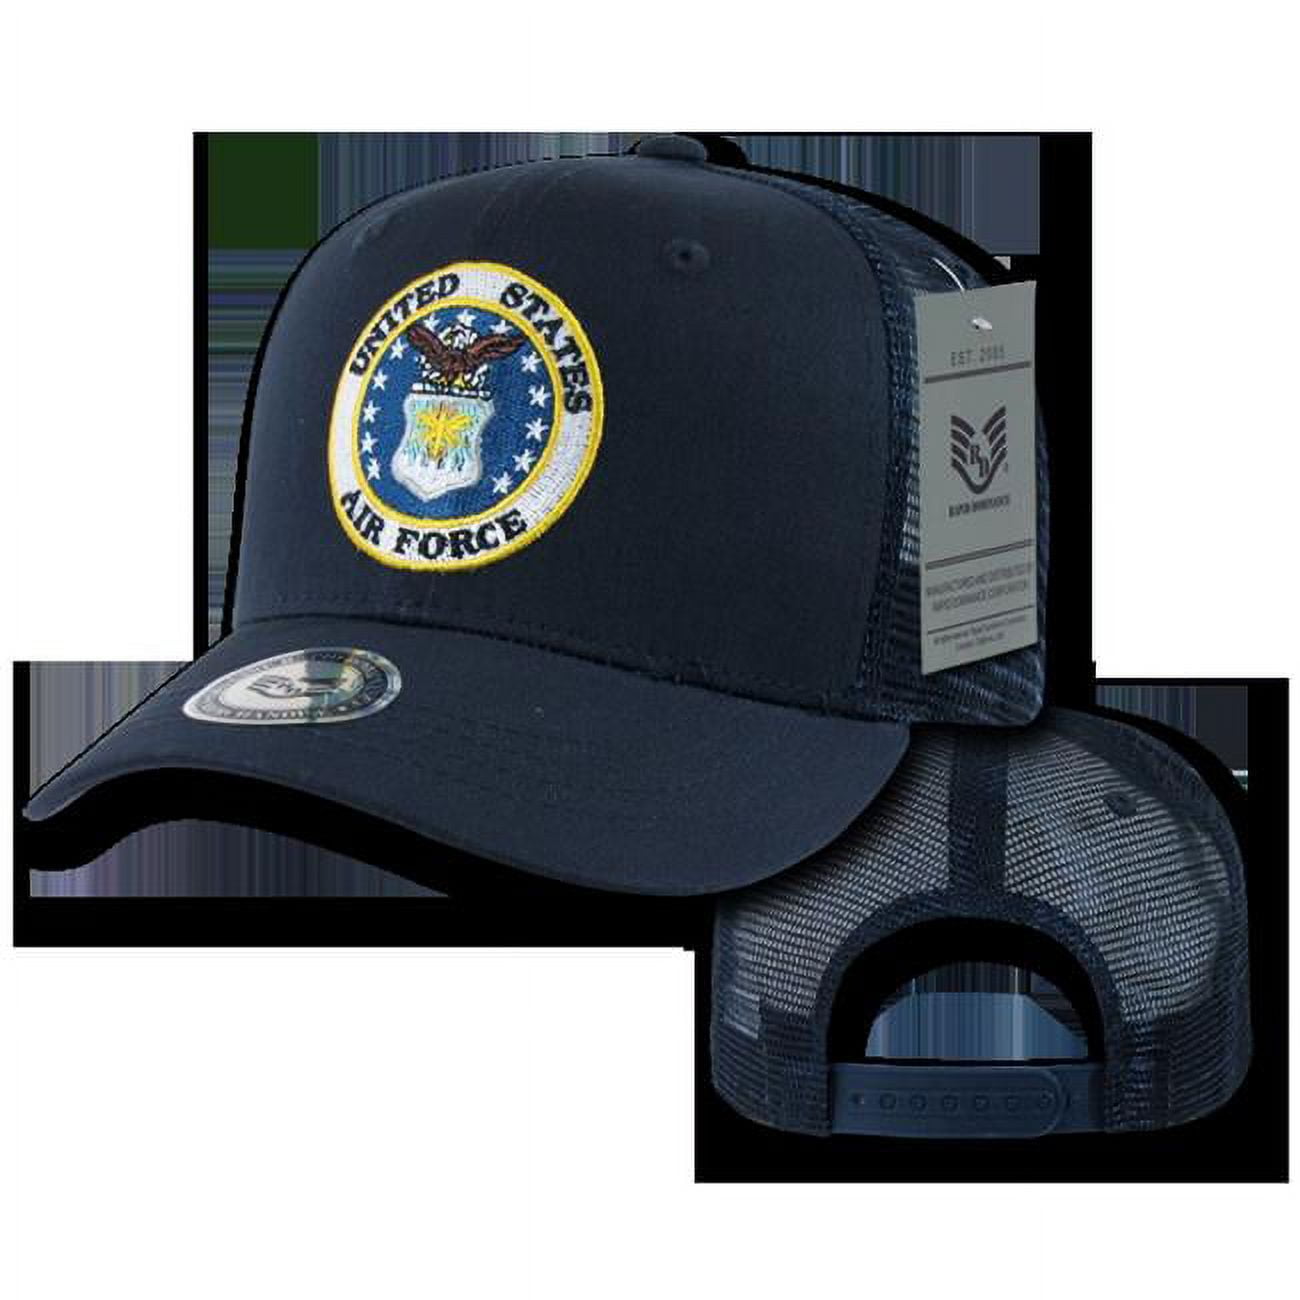 Rapid Dominance S77-AIR-NVY Back to Cap, Mesh Basics Force the Navy Air